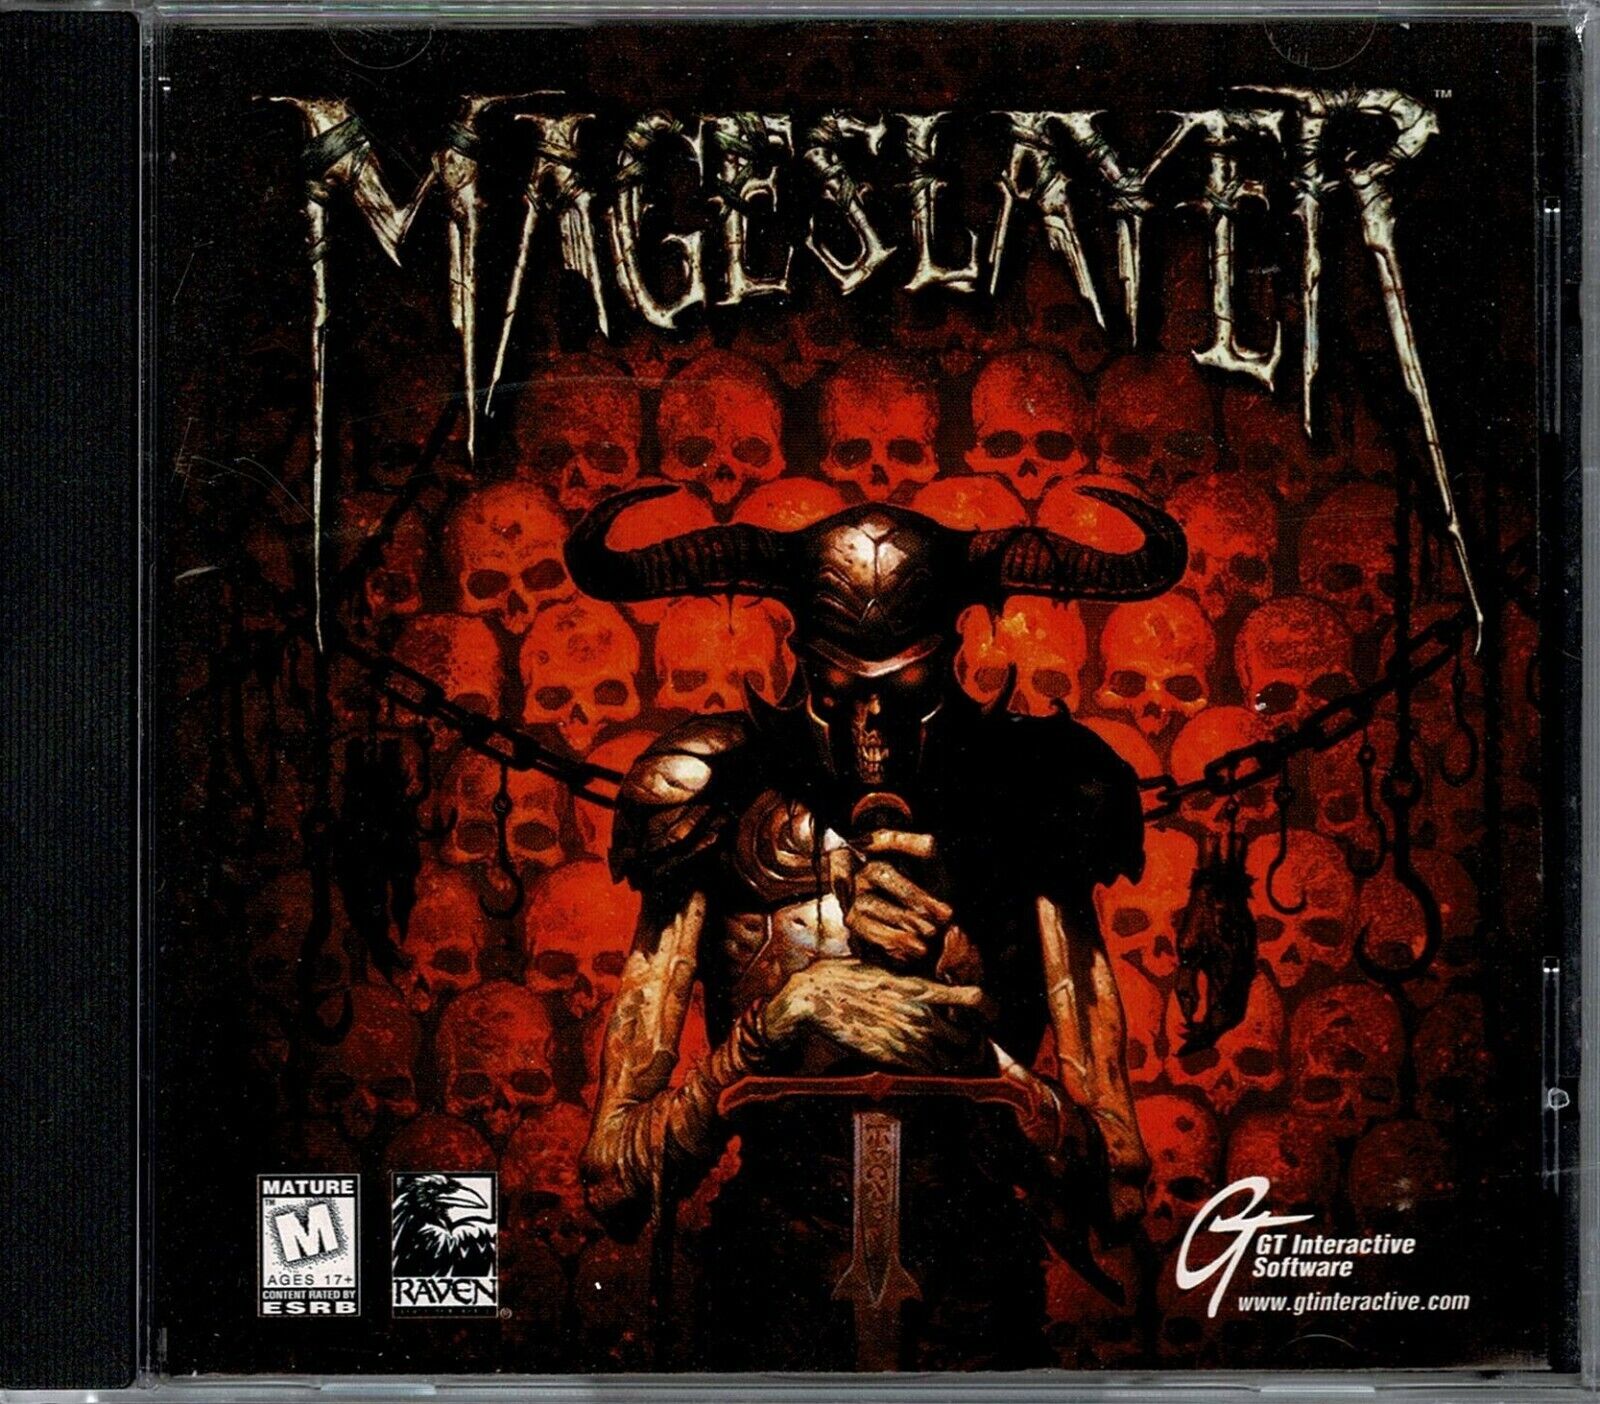 Unbelievable Mage Slayer Mageslayer Pc New XP By Creators Hexen Classic Shooter Magic Mystery on eBay